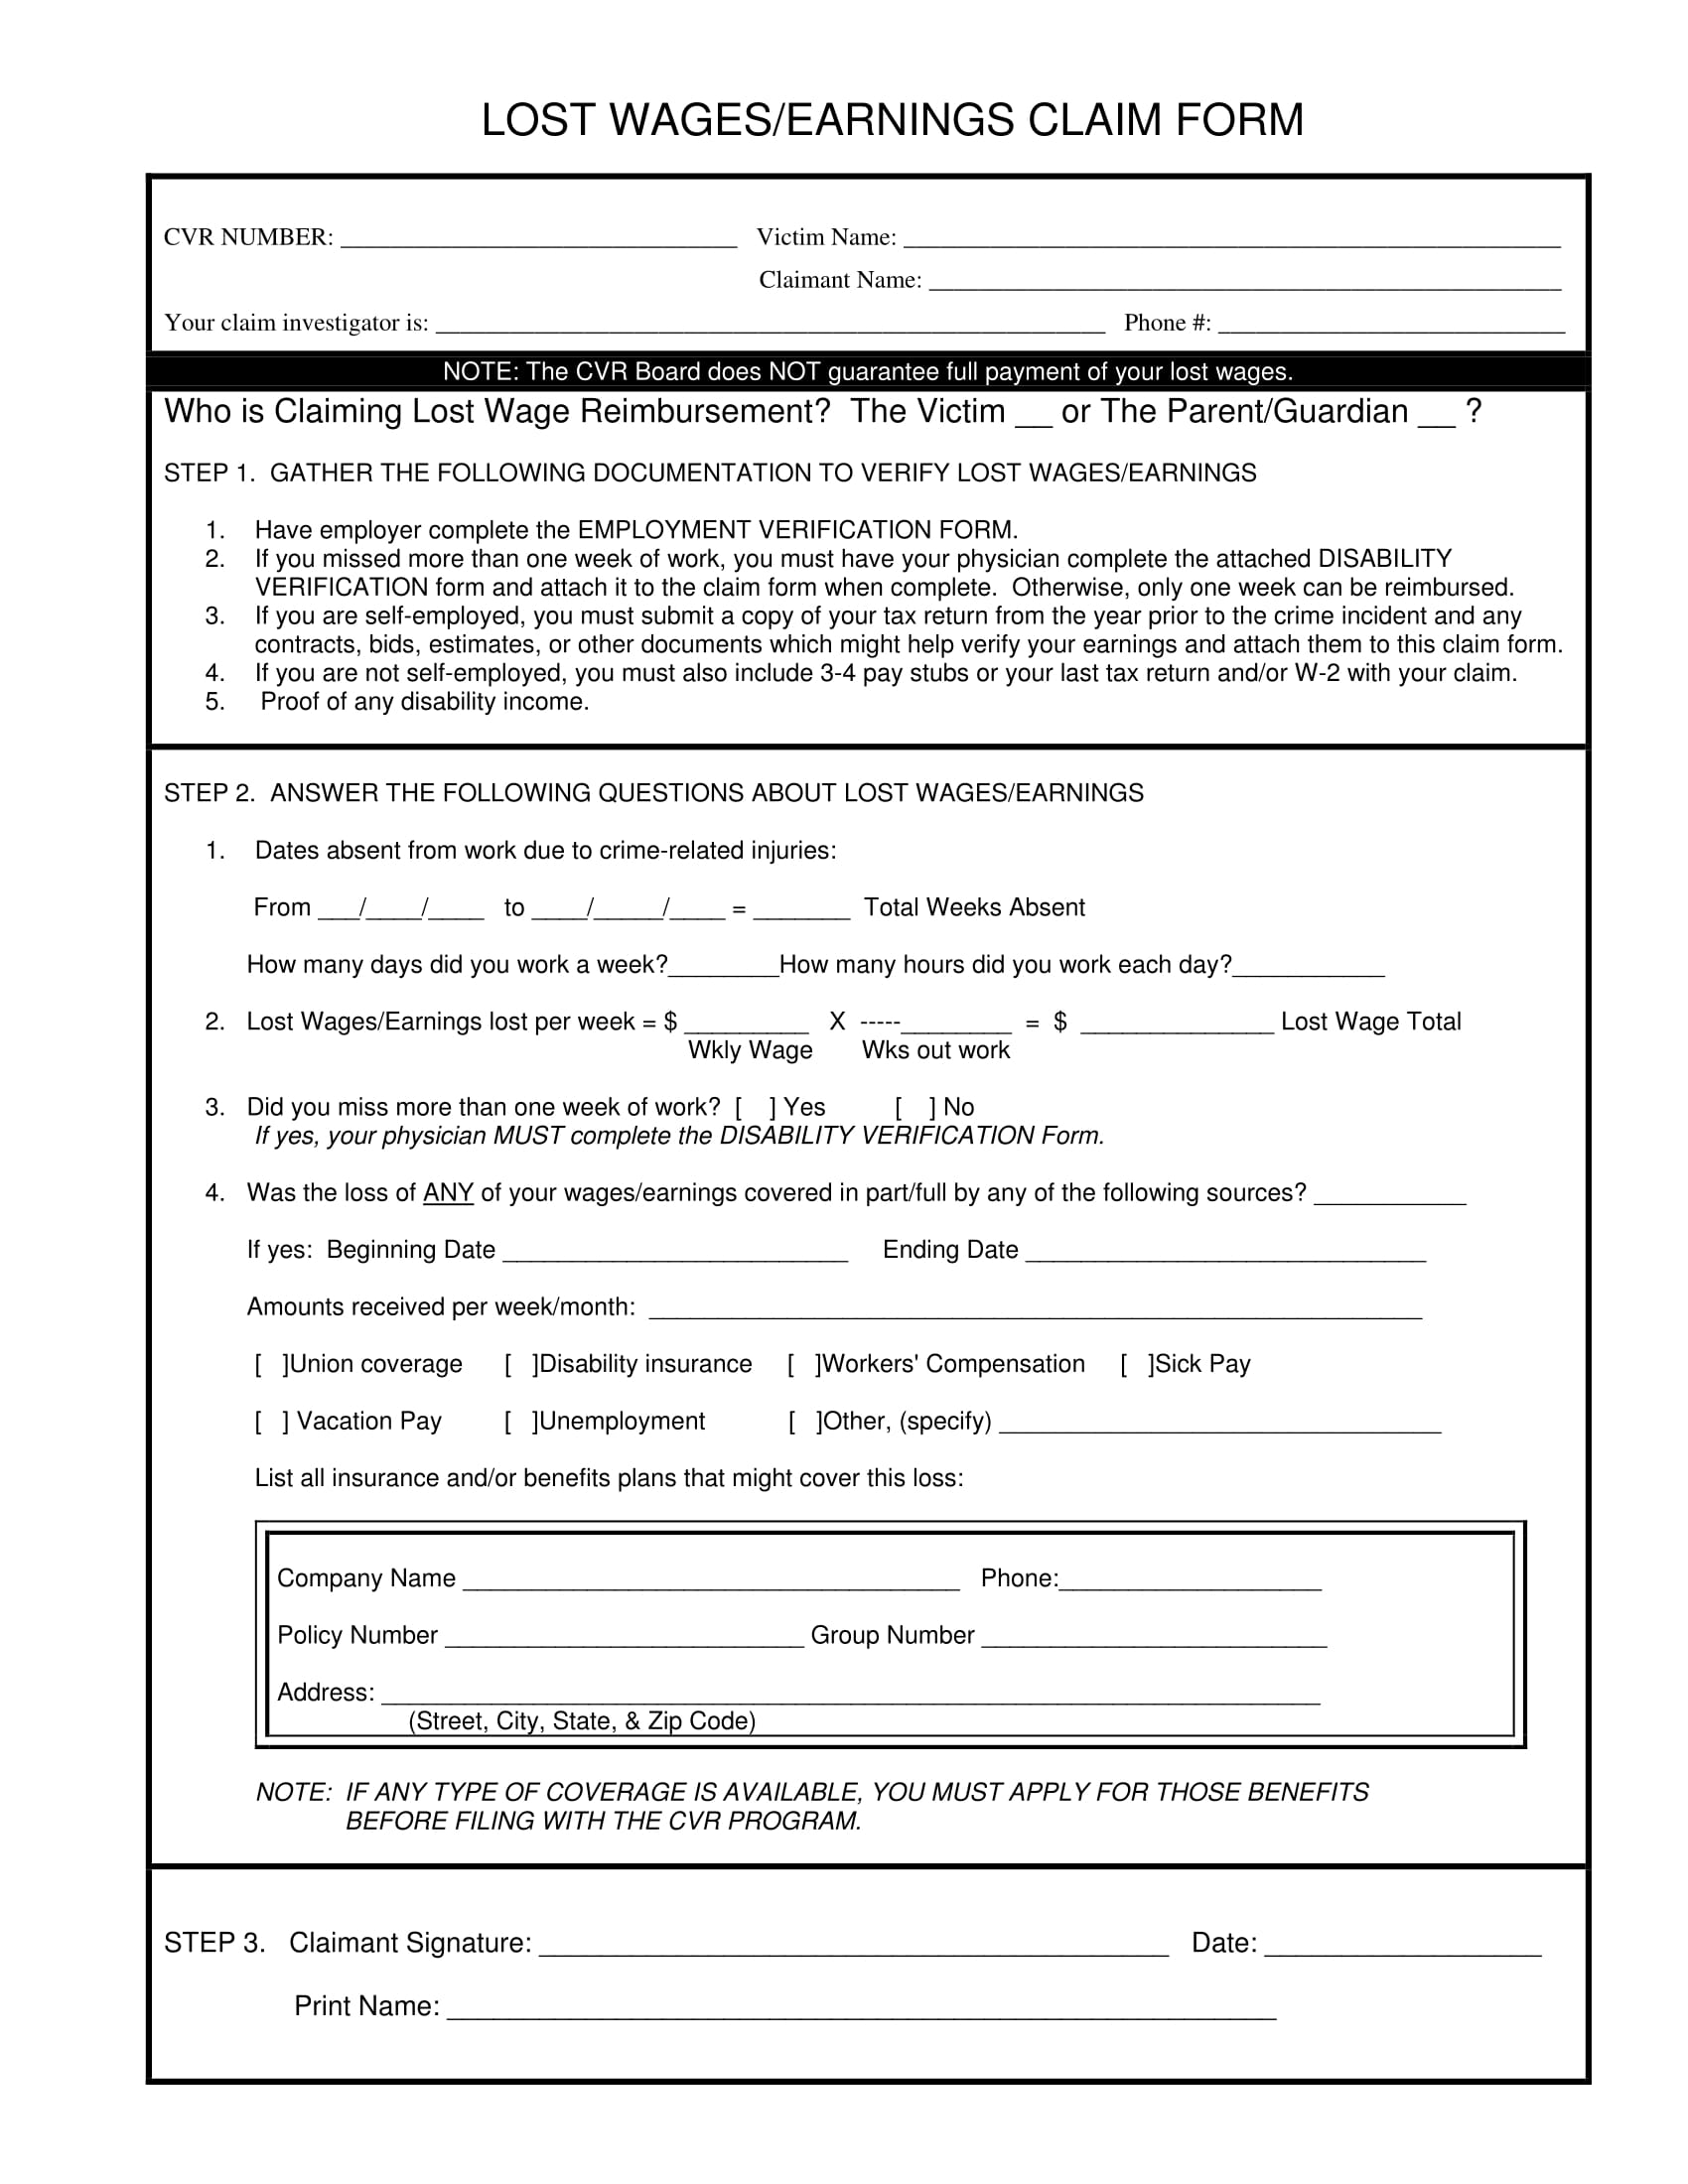 lost wage verification form 2